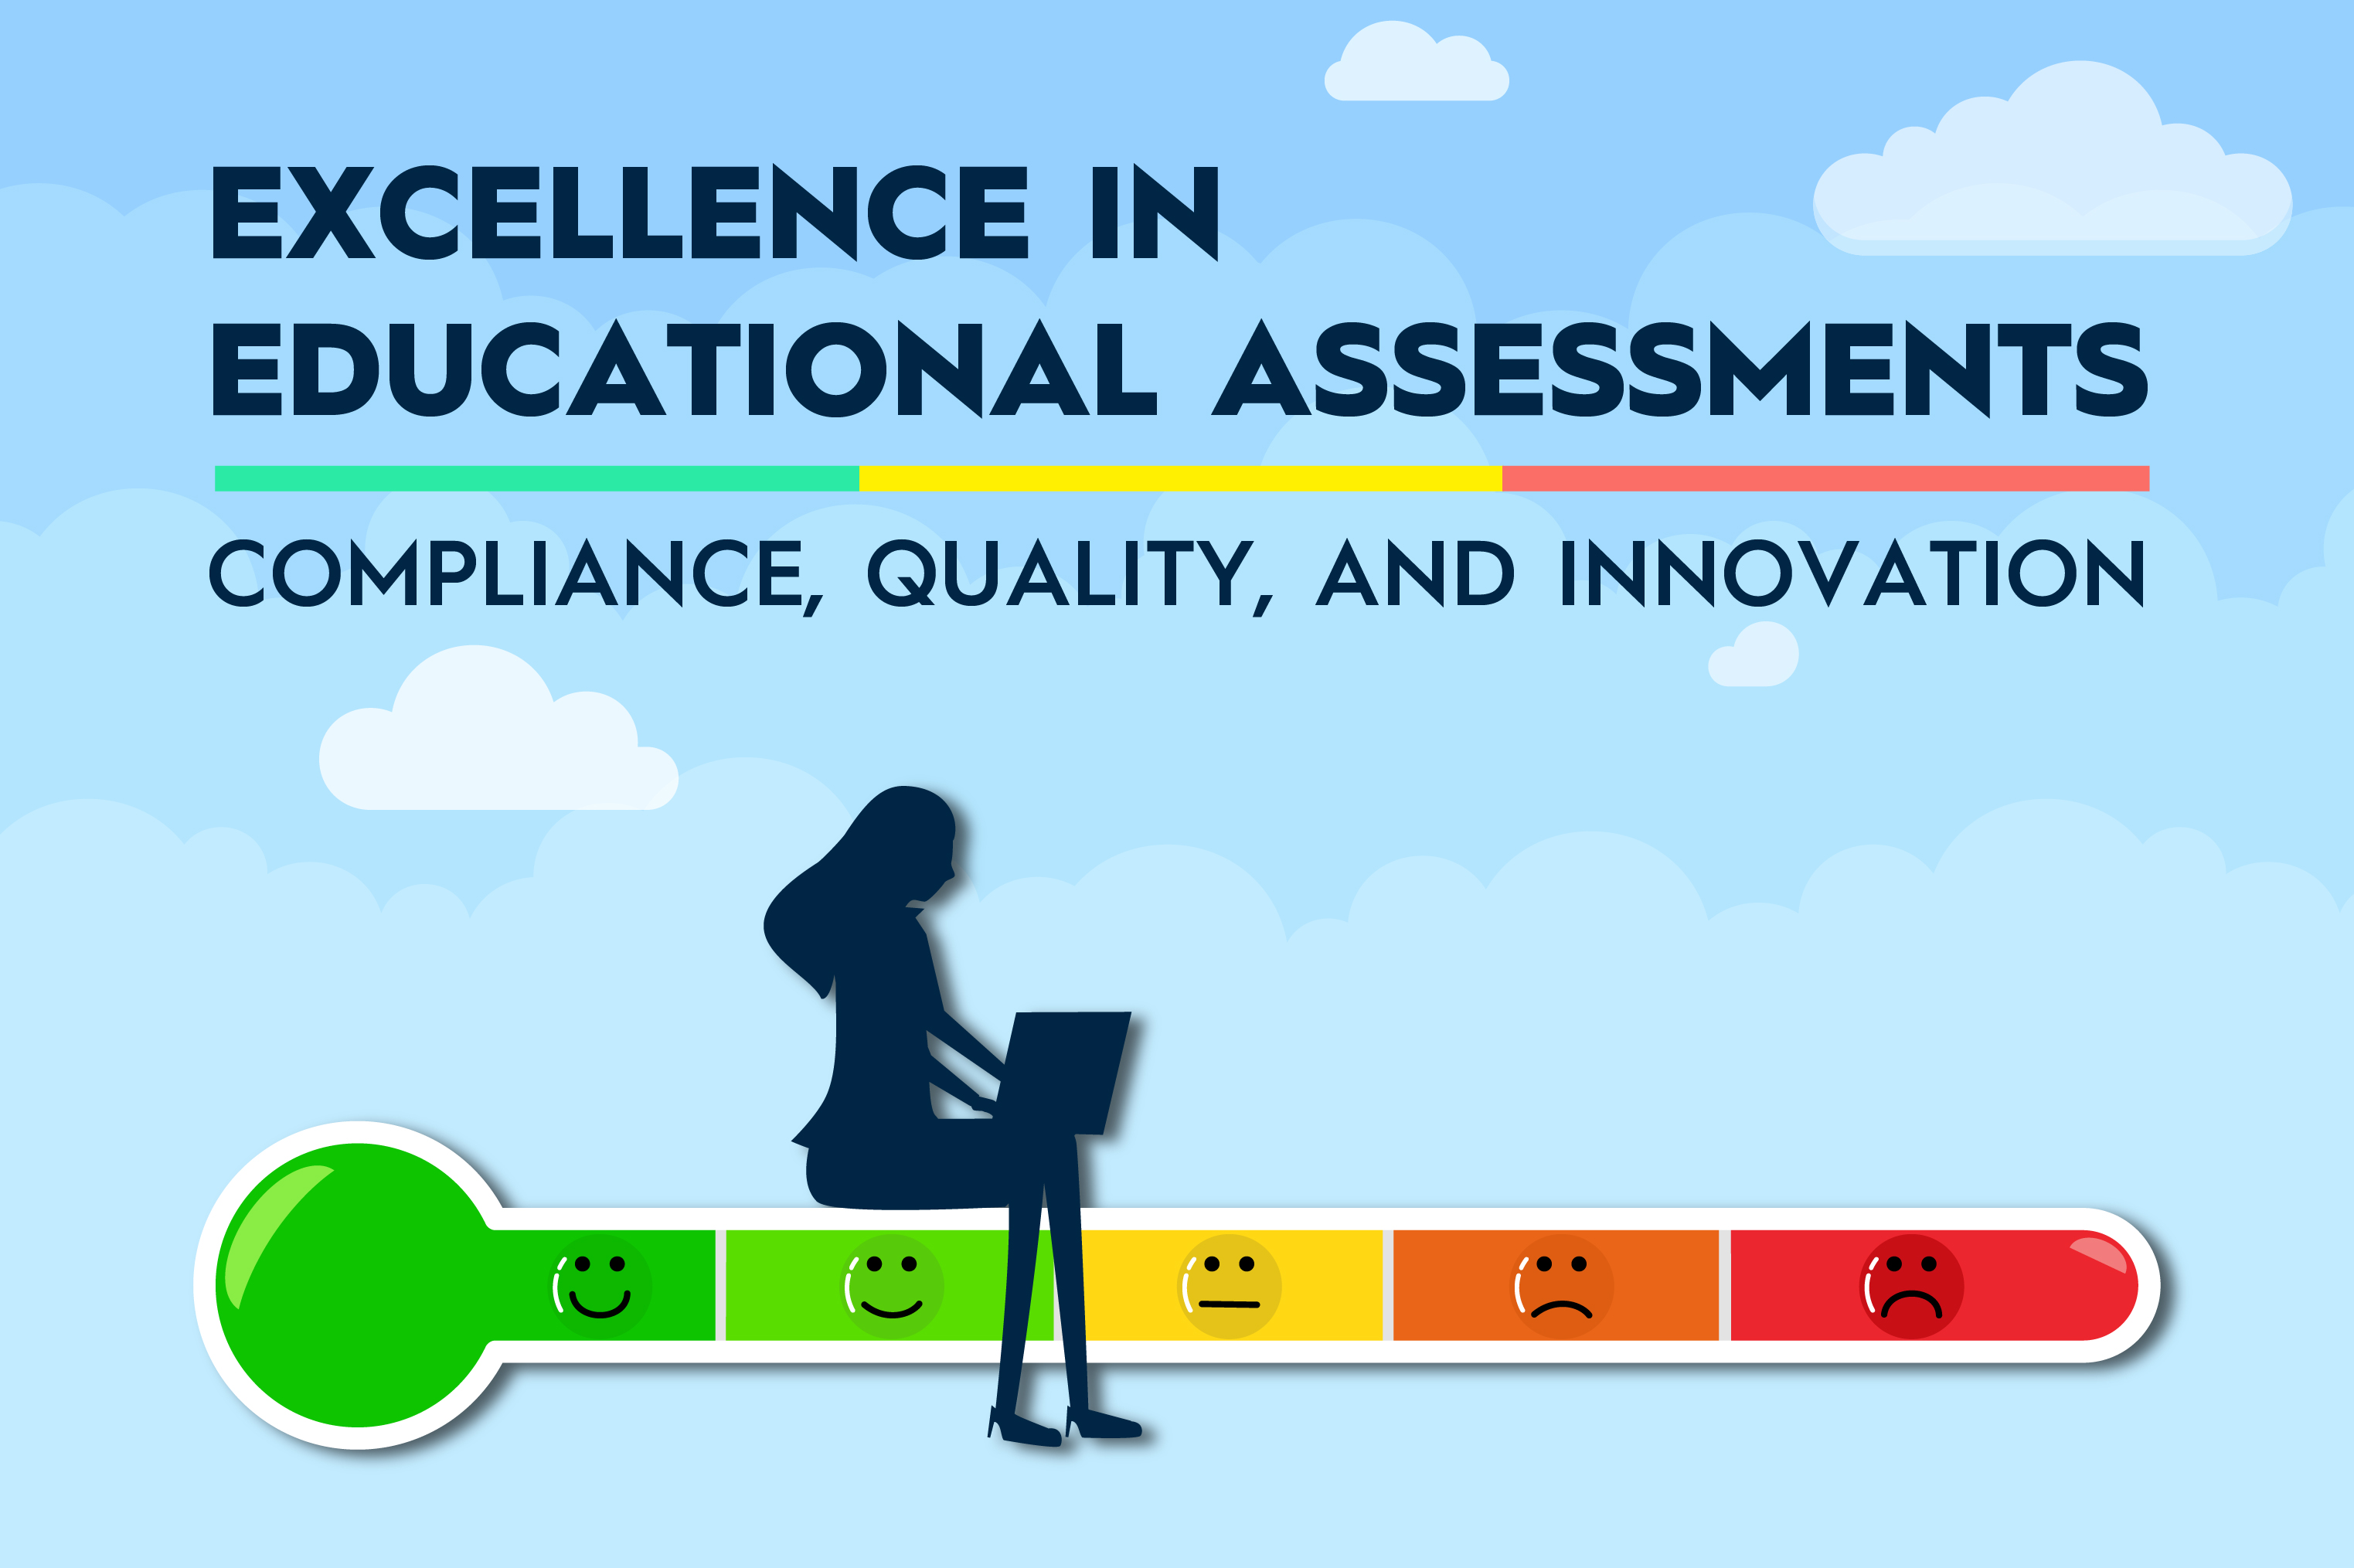 Excellence in Educational Assessments: Compliance, Quality, and Innovation